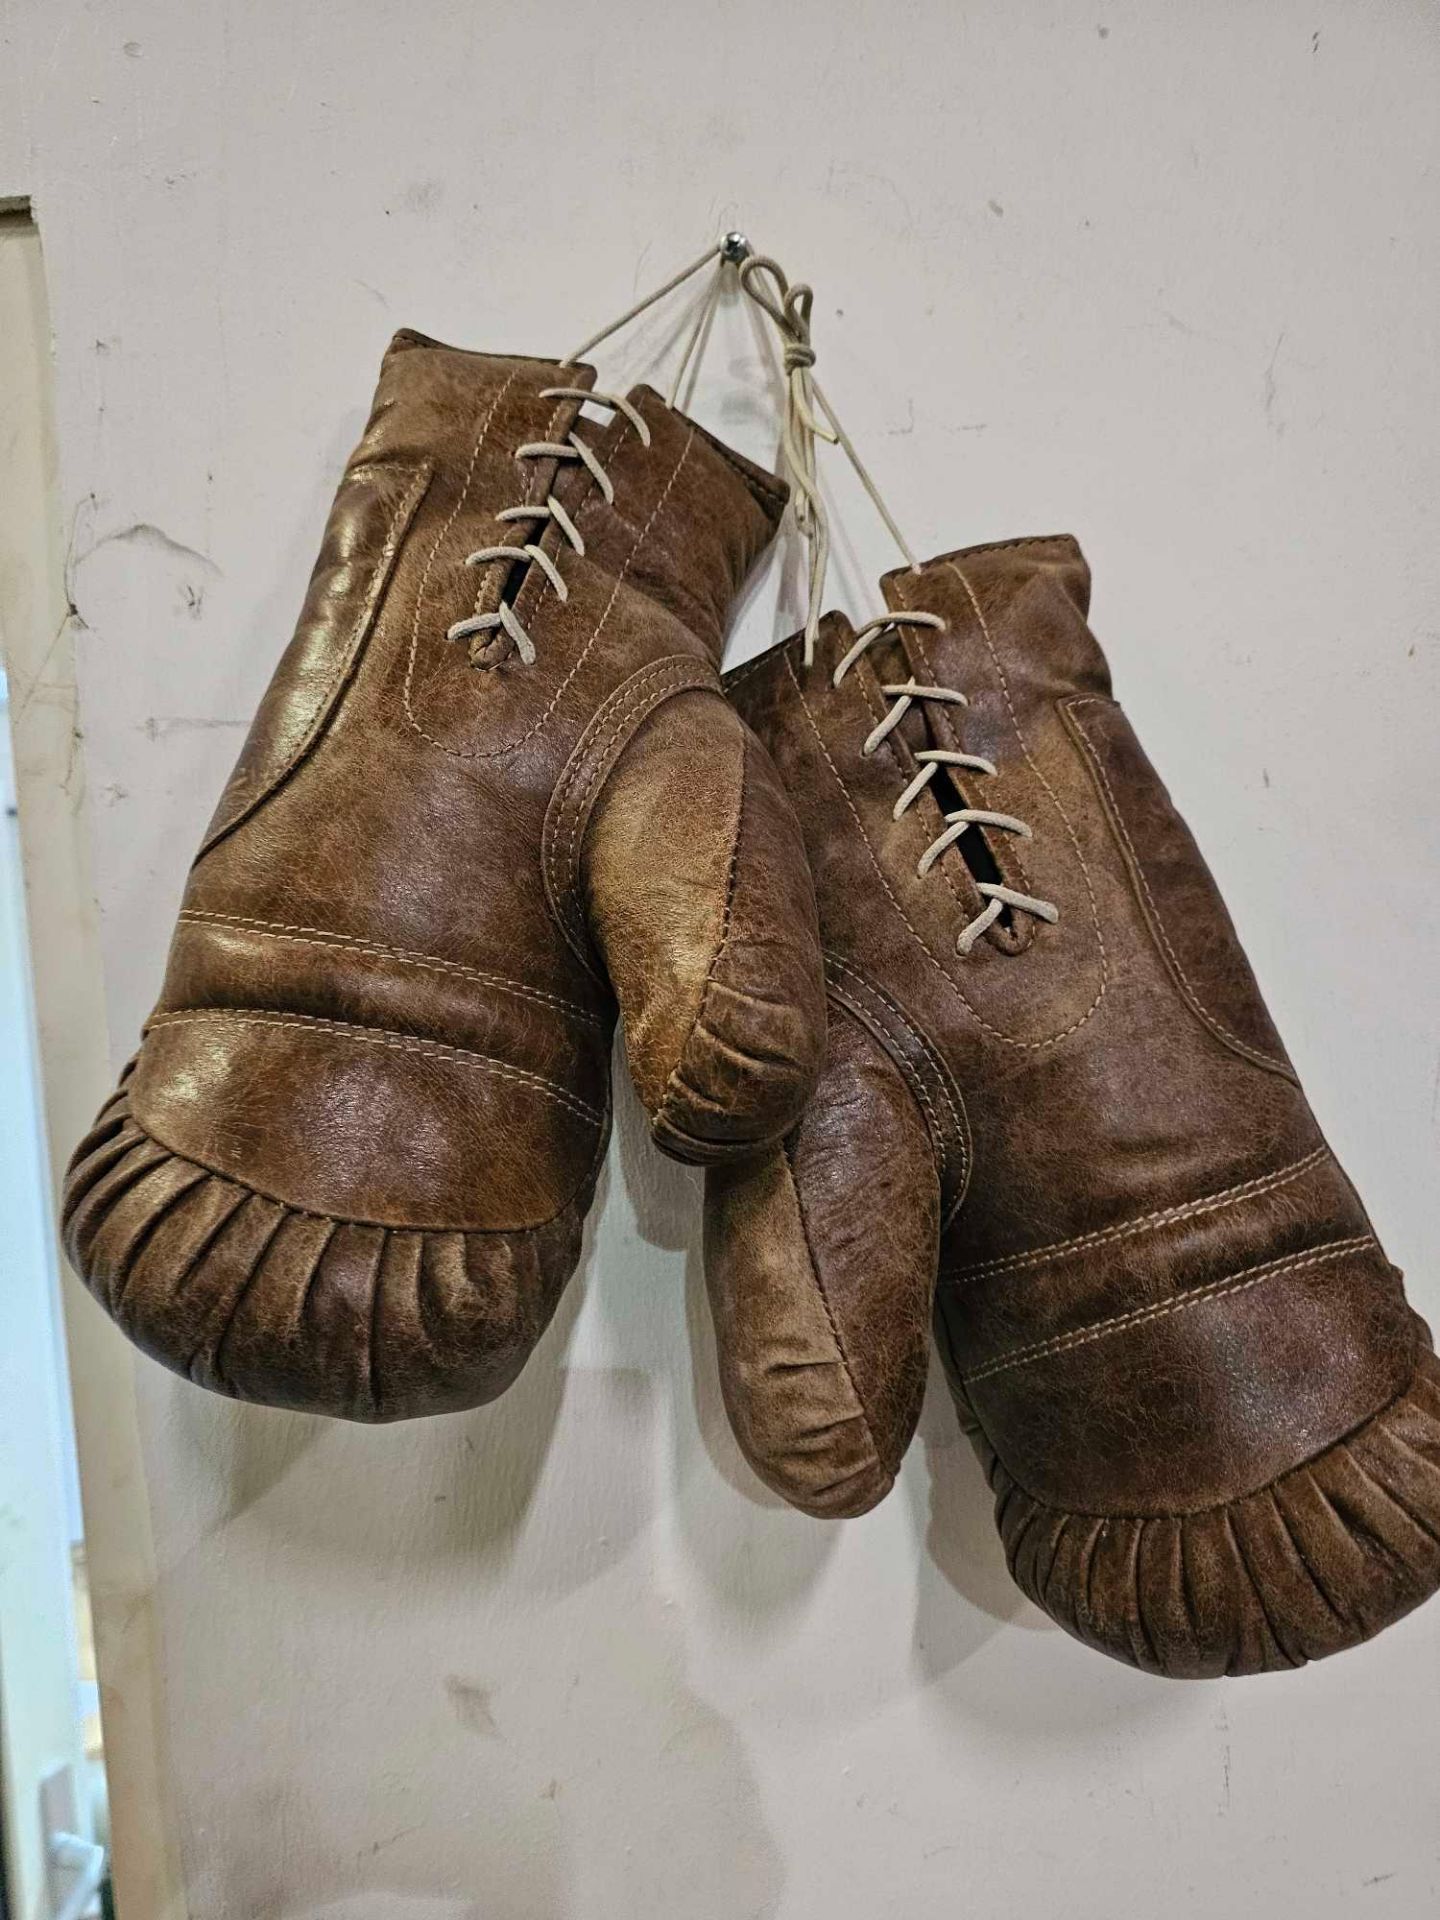 Ex Display Timothy Oulton Sporting Boxing Glove A Pair Hand Stitched And Handcrafted In Burnished